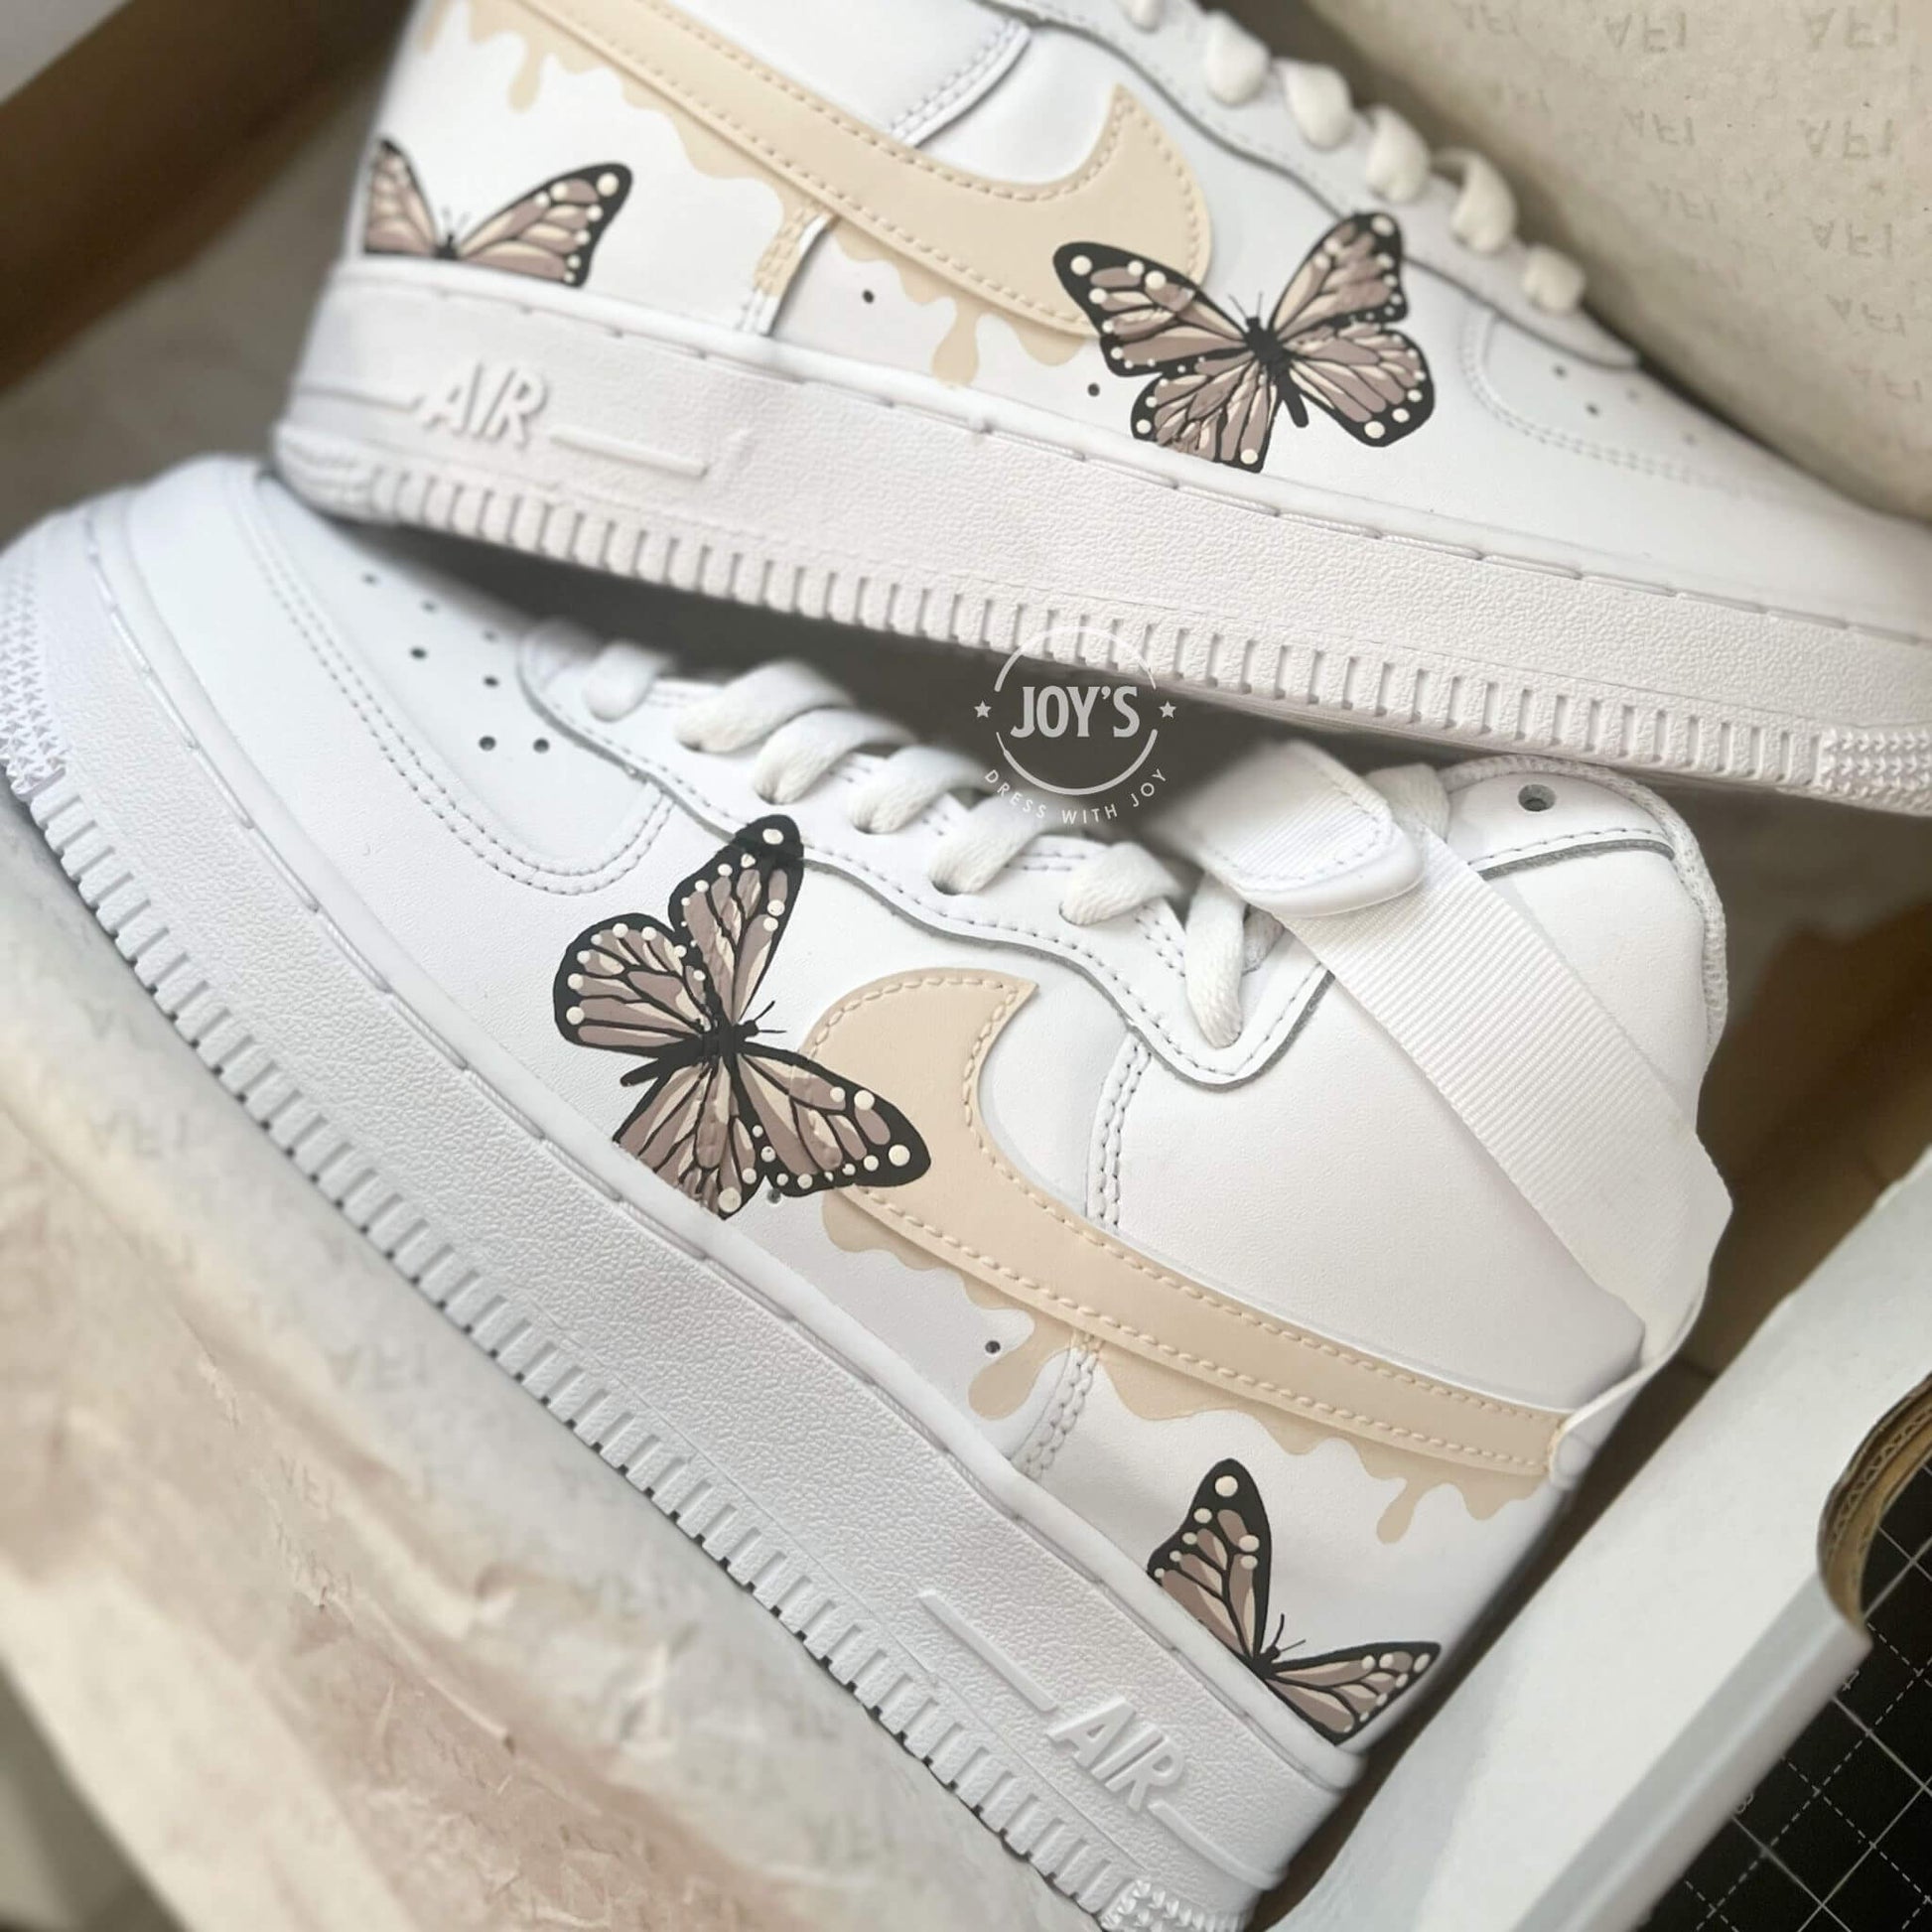 Nike, Shoes, Nike Air Force Low Custom Butterfly